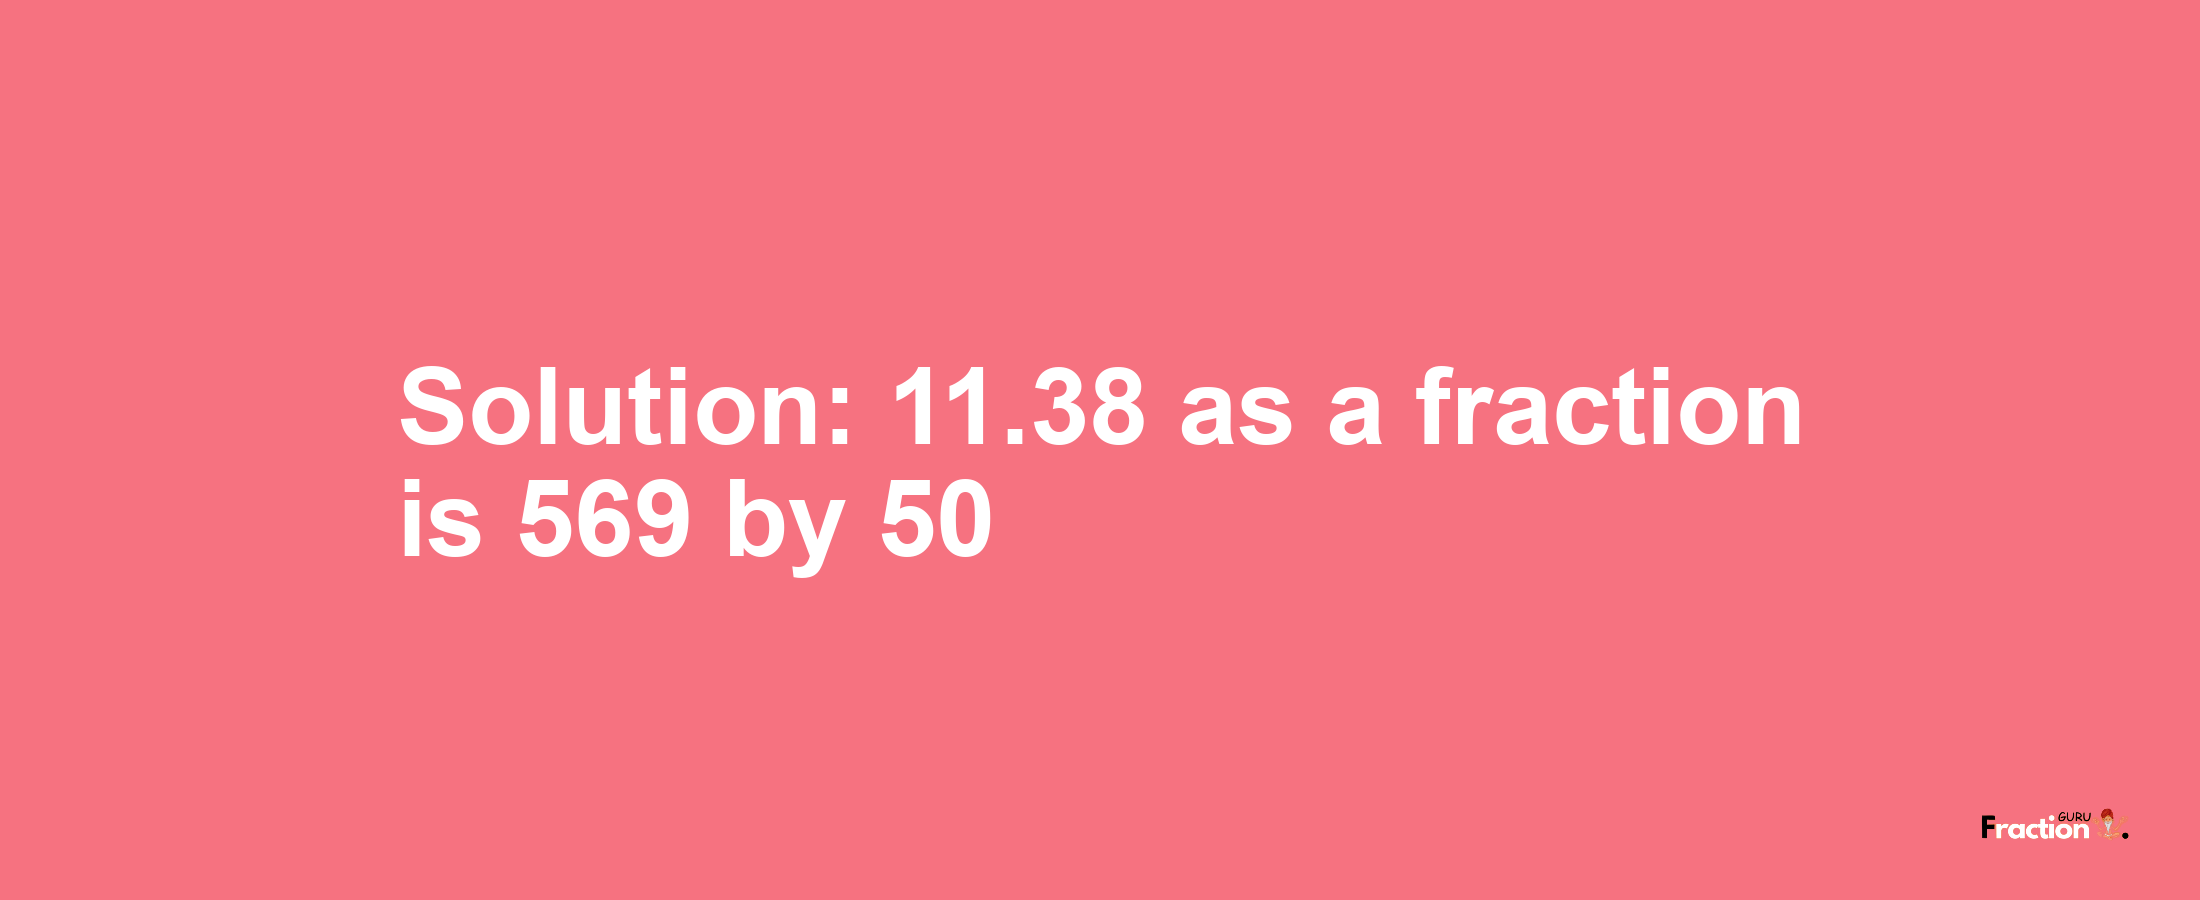 Solution:11.38 as a fraction is 569/50